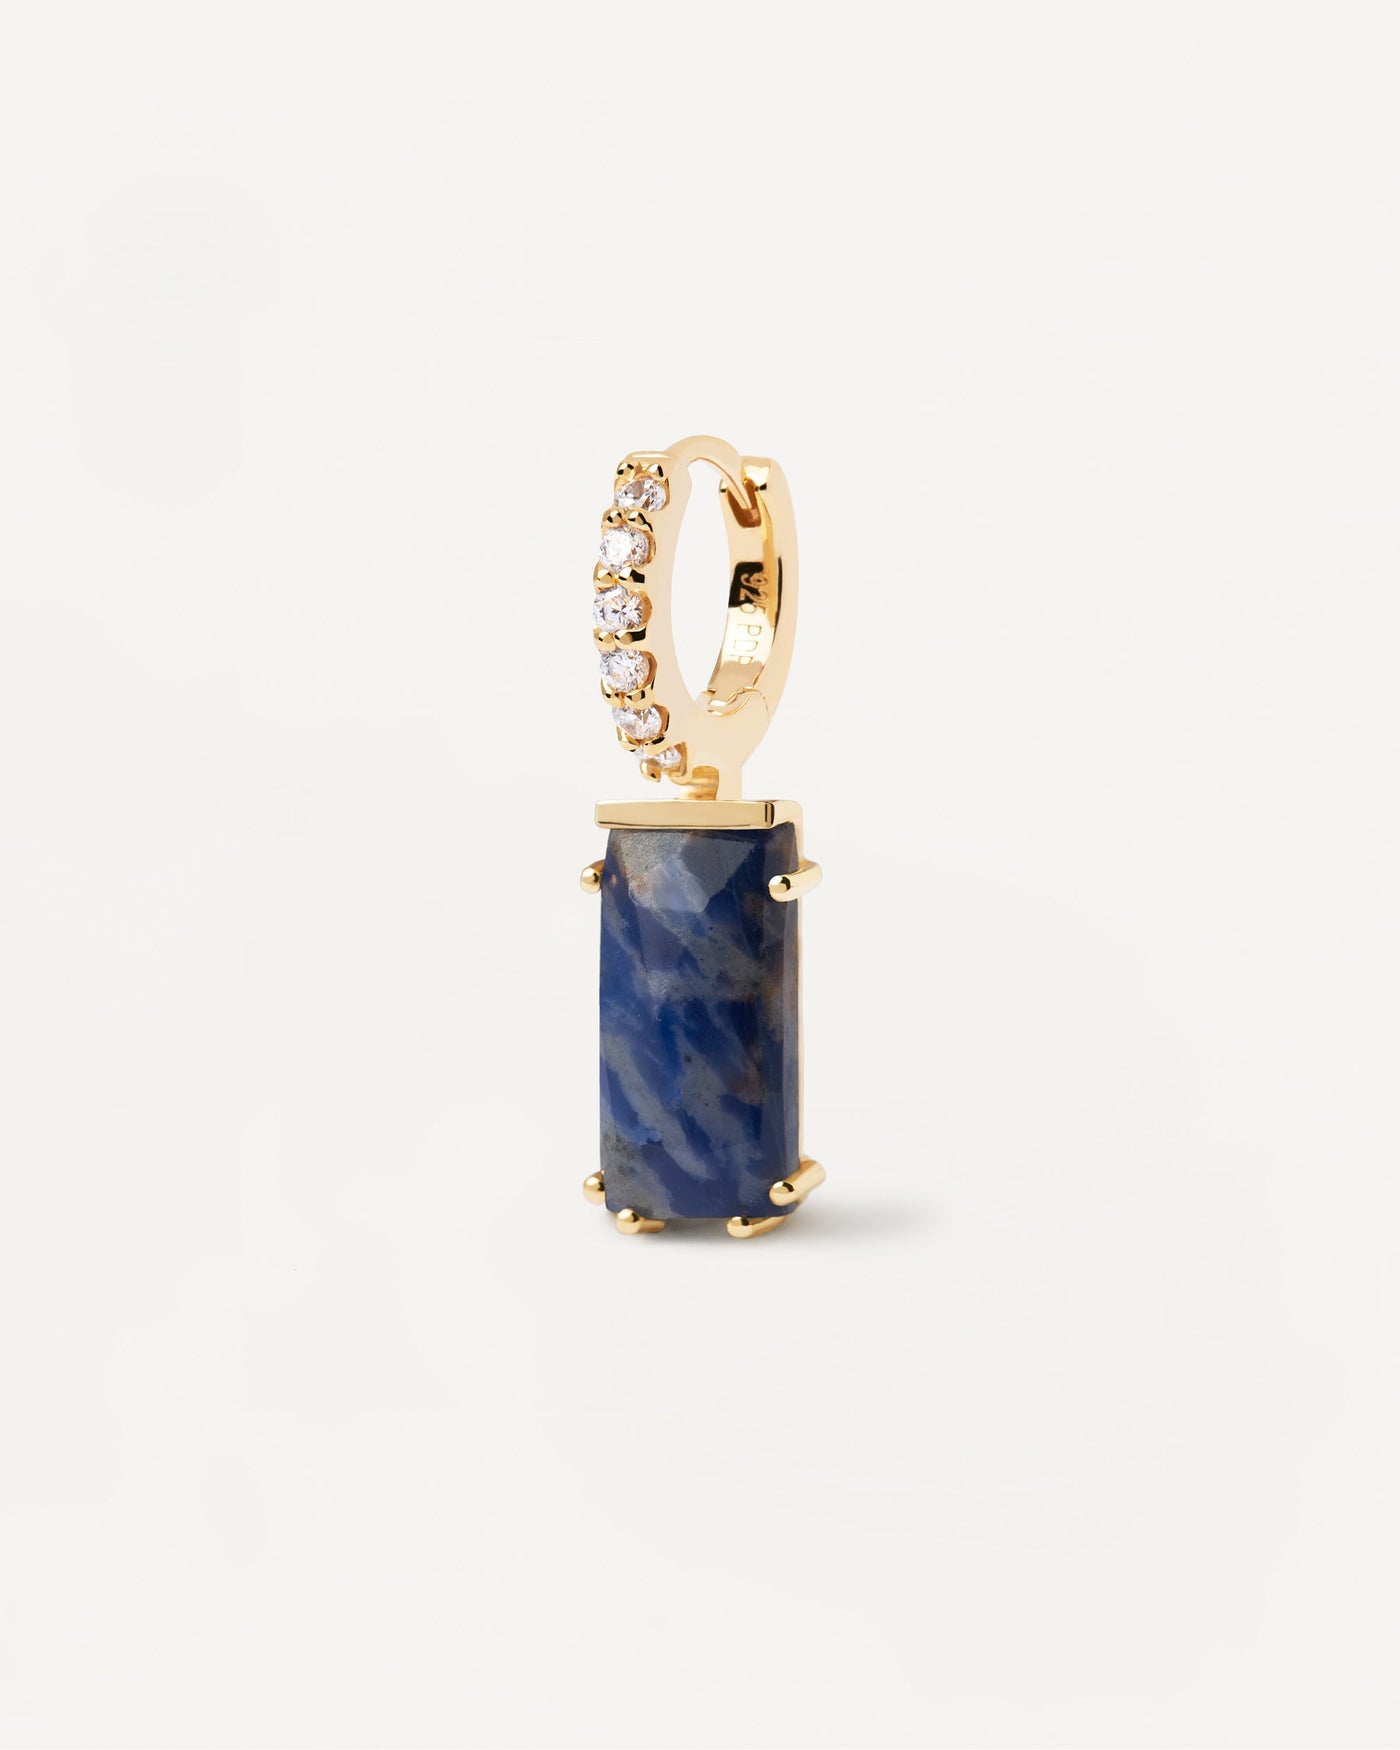 2023 Selection | Kaori Sodalite Single Earring. Gold-plated hoop ear piercing with white zirconia and dark blue rectangular gemstone pendant. Get the latest arrival from PDPAOLA. Place your order safely and get this Best Seller. Free Shipping.